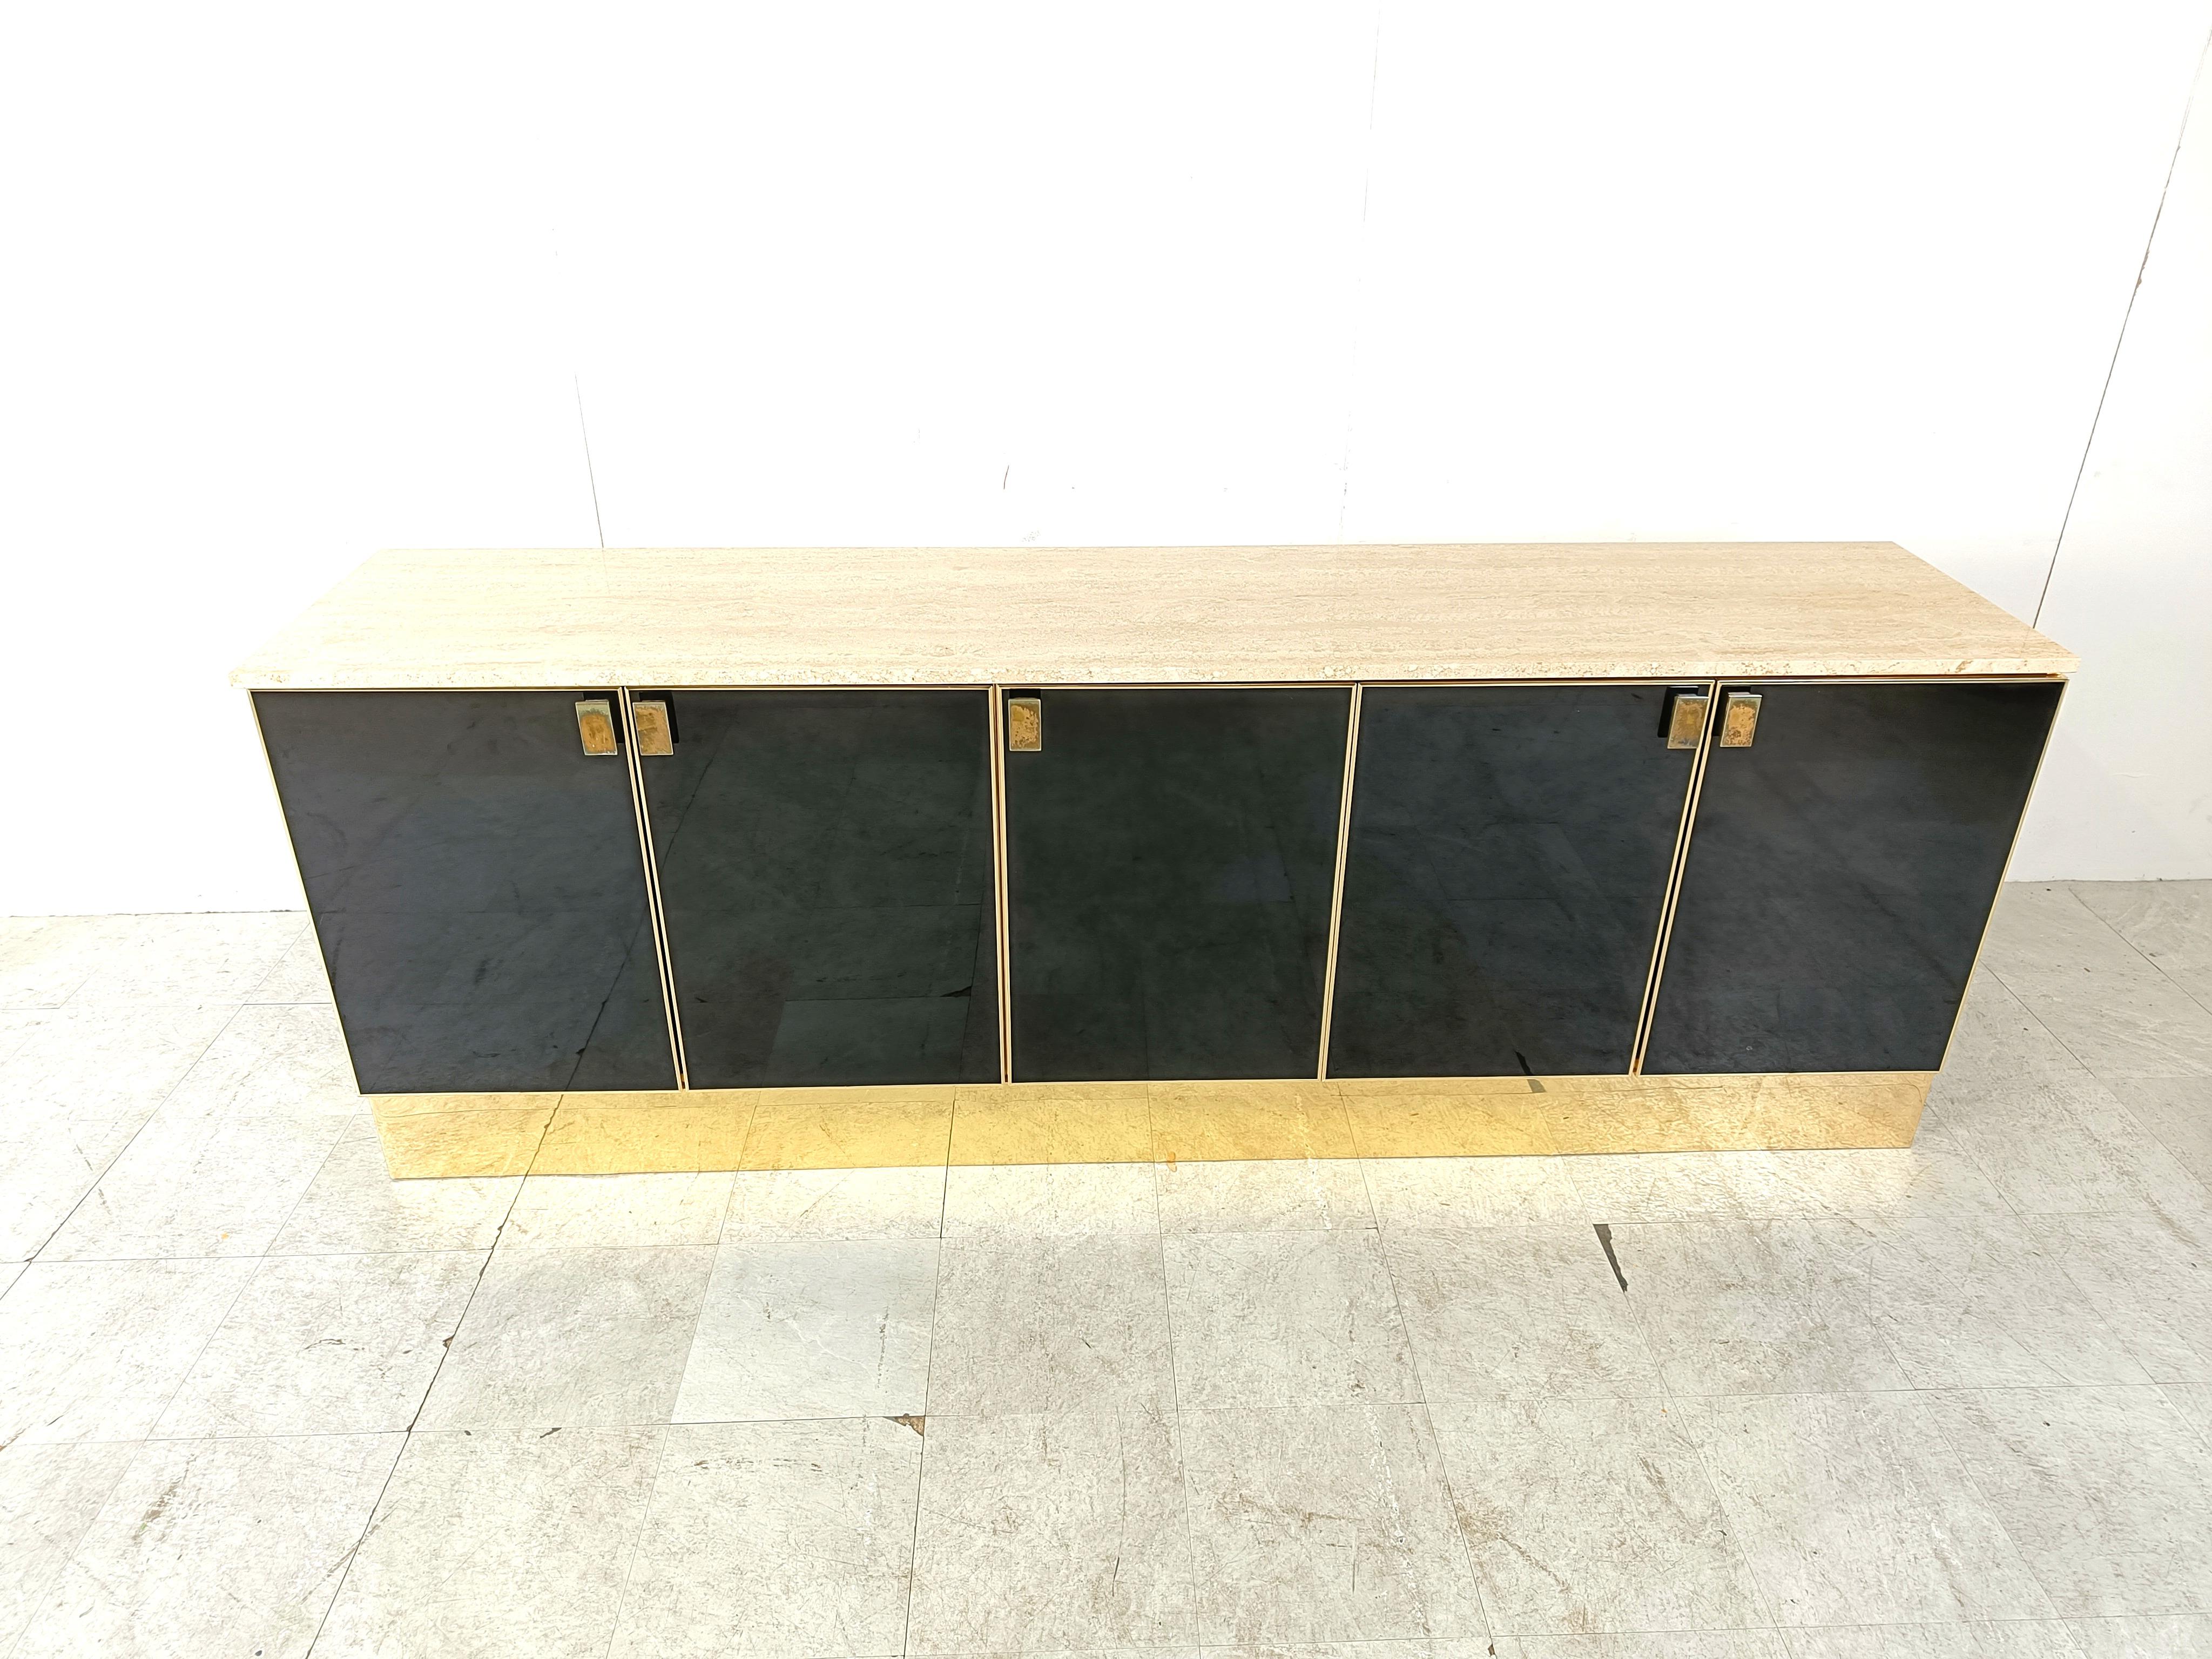 Luxurious black lacquer credenza with brass details and handles and a gorgeous travertine table top.

The sideboard has 5 doors, with two integrated drawers, offering plenty of storage space.

Beautiful piece with normal age related wear.

1980s -